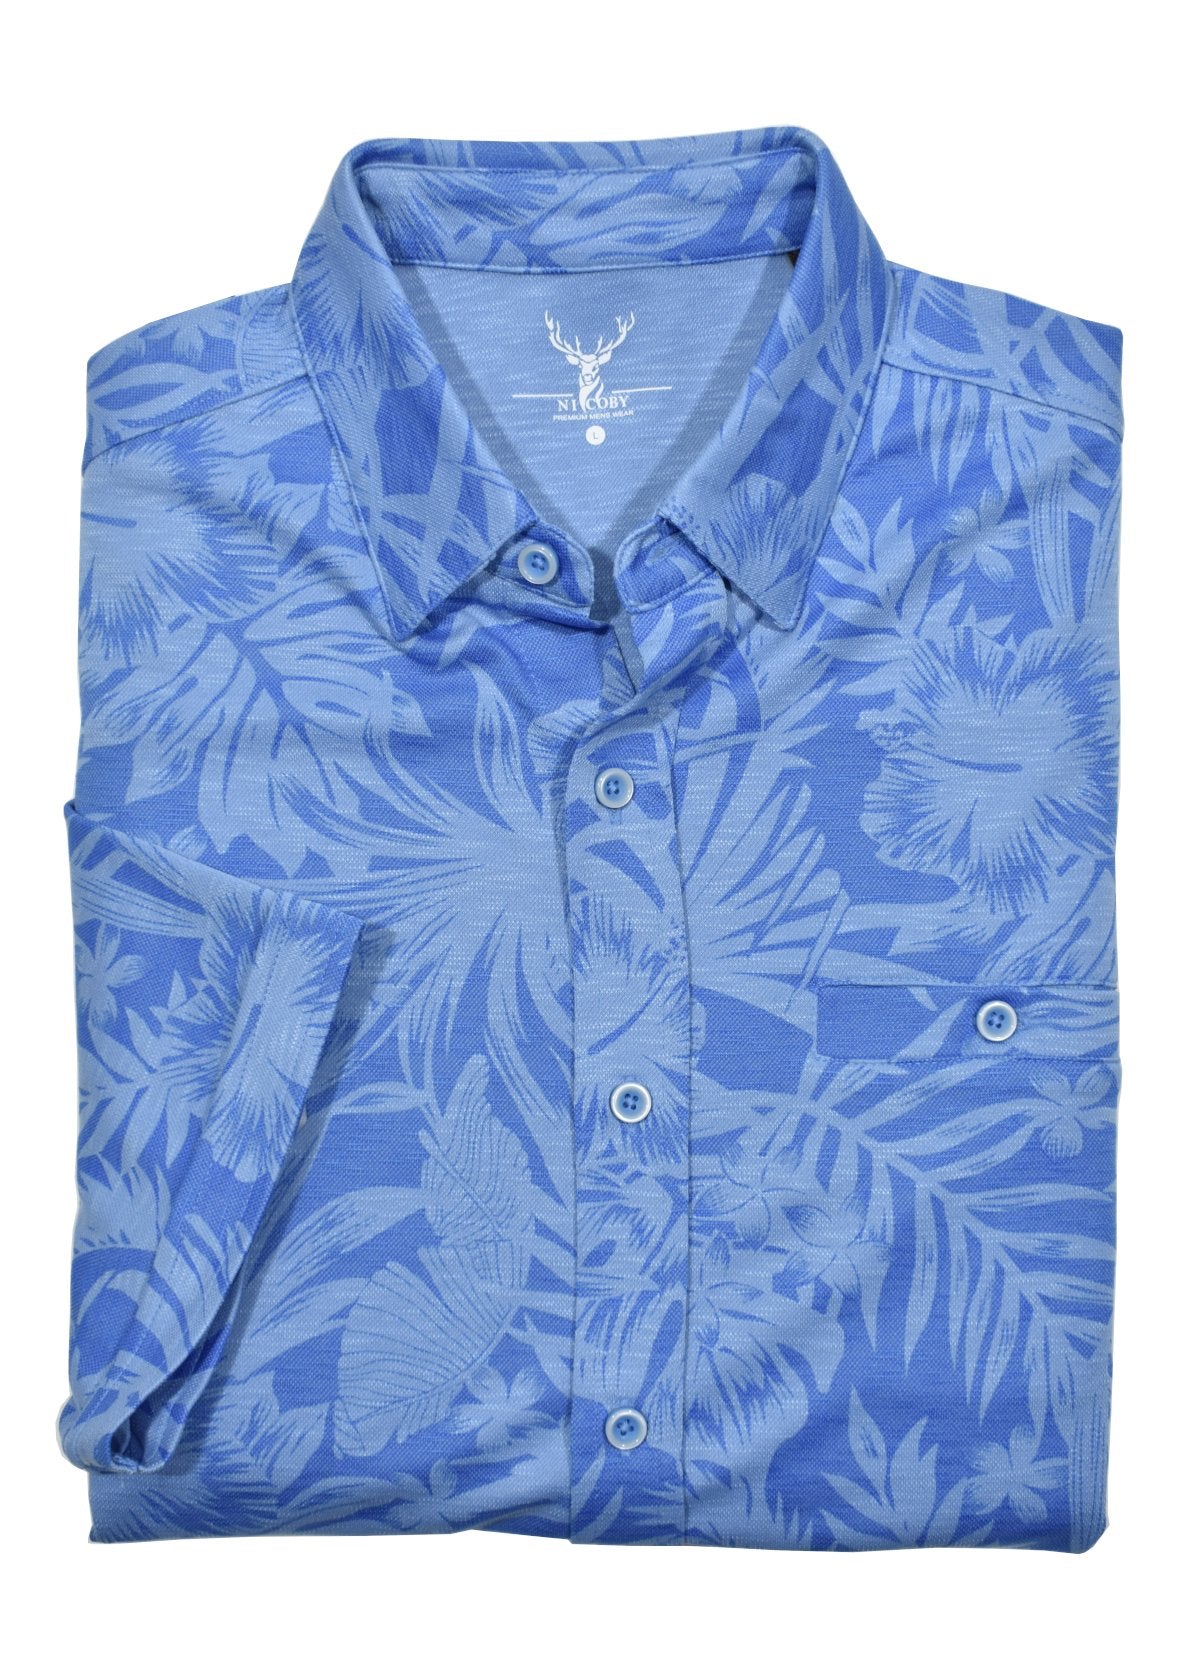 The unmistakable look and feel of polynosic microfiber in a tonal floral jacquard. Full button front short sleeved design with a self fabric collar and matched buttons. Add in an open cuffed sleeve and classic chest pocket. Classic shaped fit.